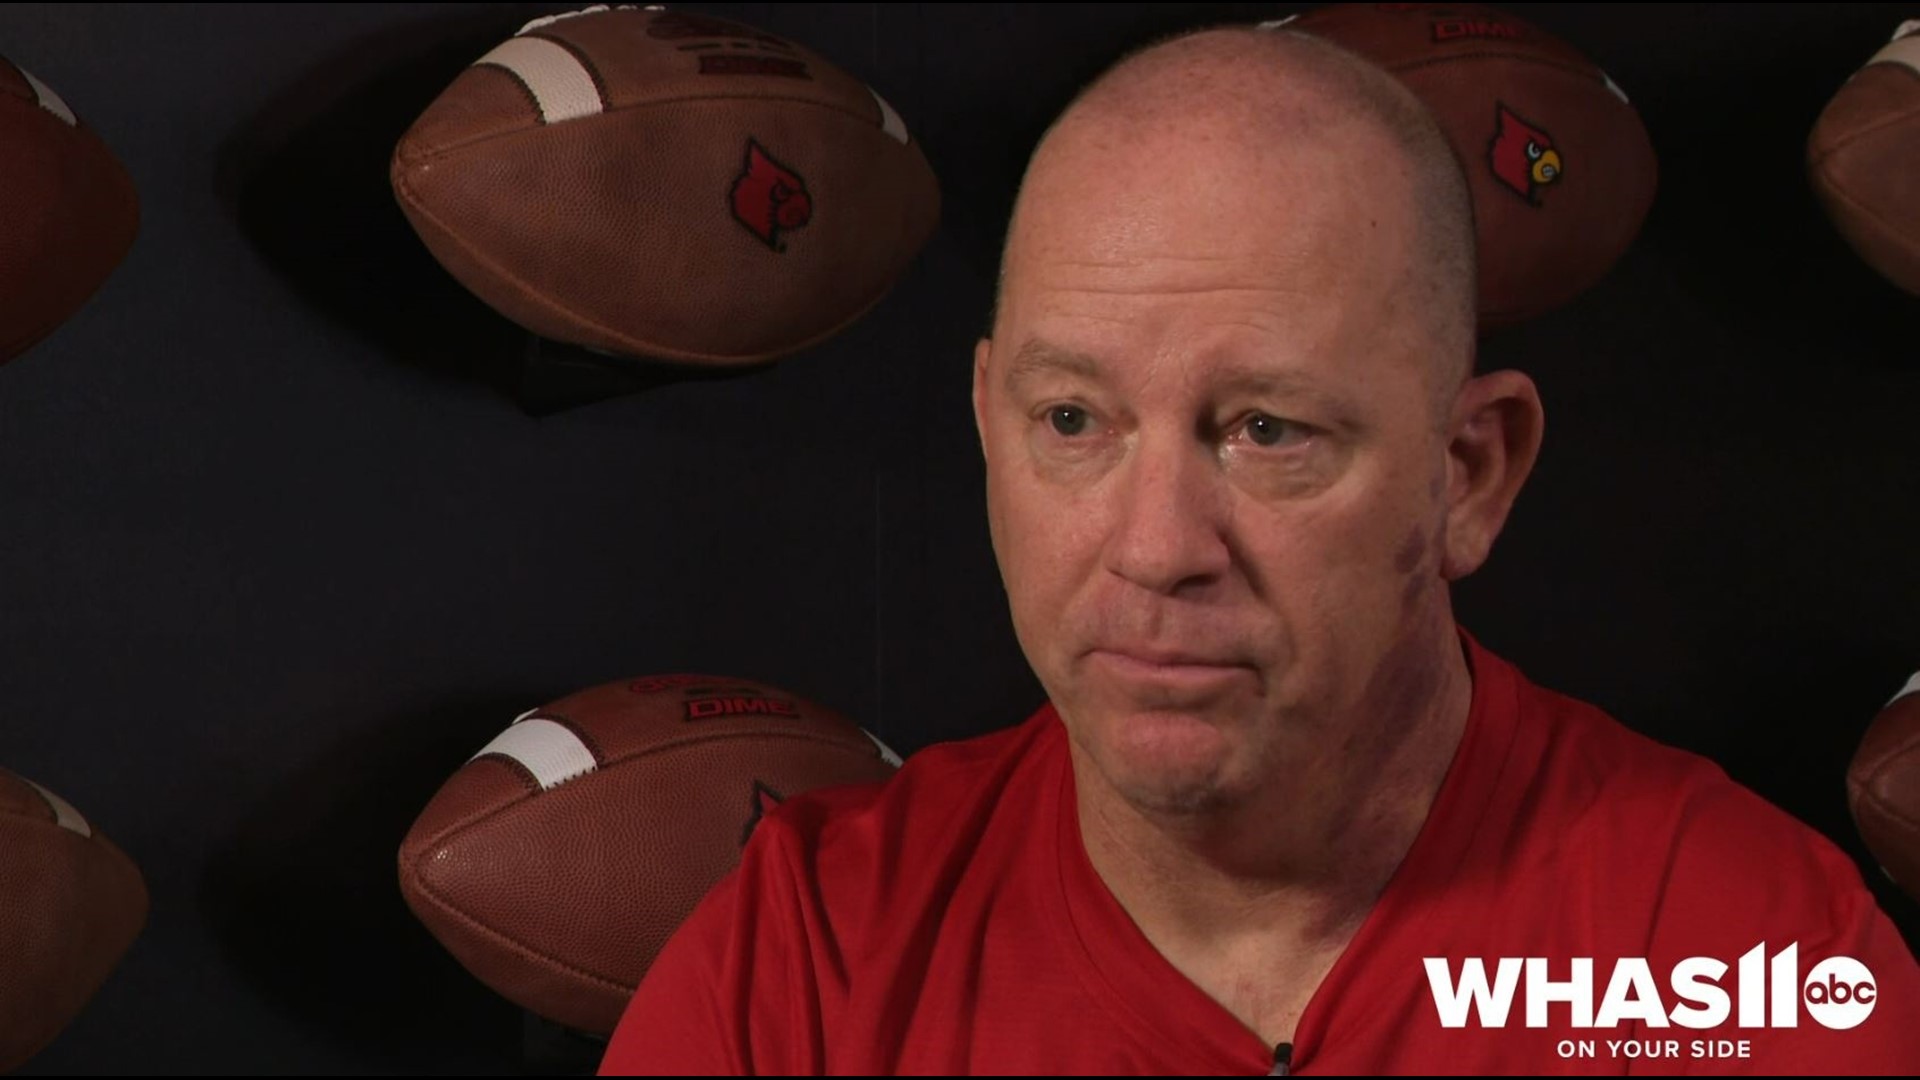 RAW: Full interview with UofL football coach Jeff Brohm 